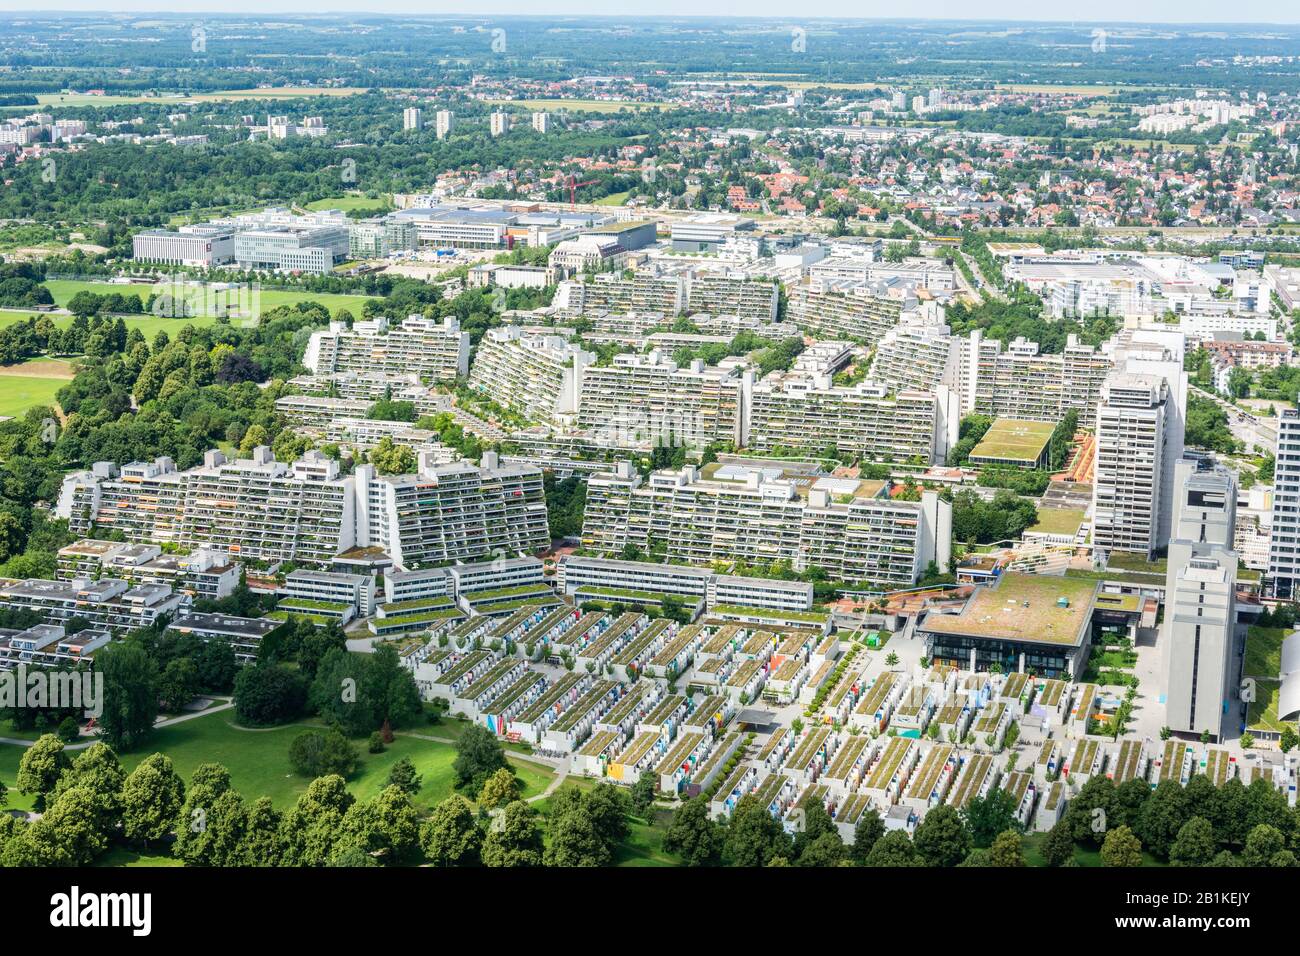 Munich, Germany – July 1, 2016. Aerial view over Olympic Village (Olympisches Dorf) in Munich, in summer. The village was constructed for the 1972 Sum Stock Photo